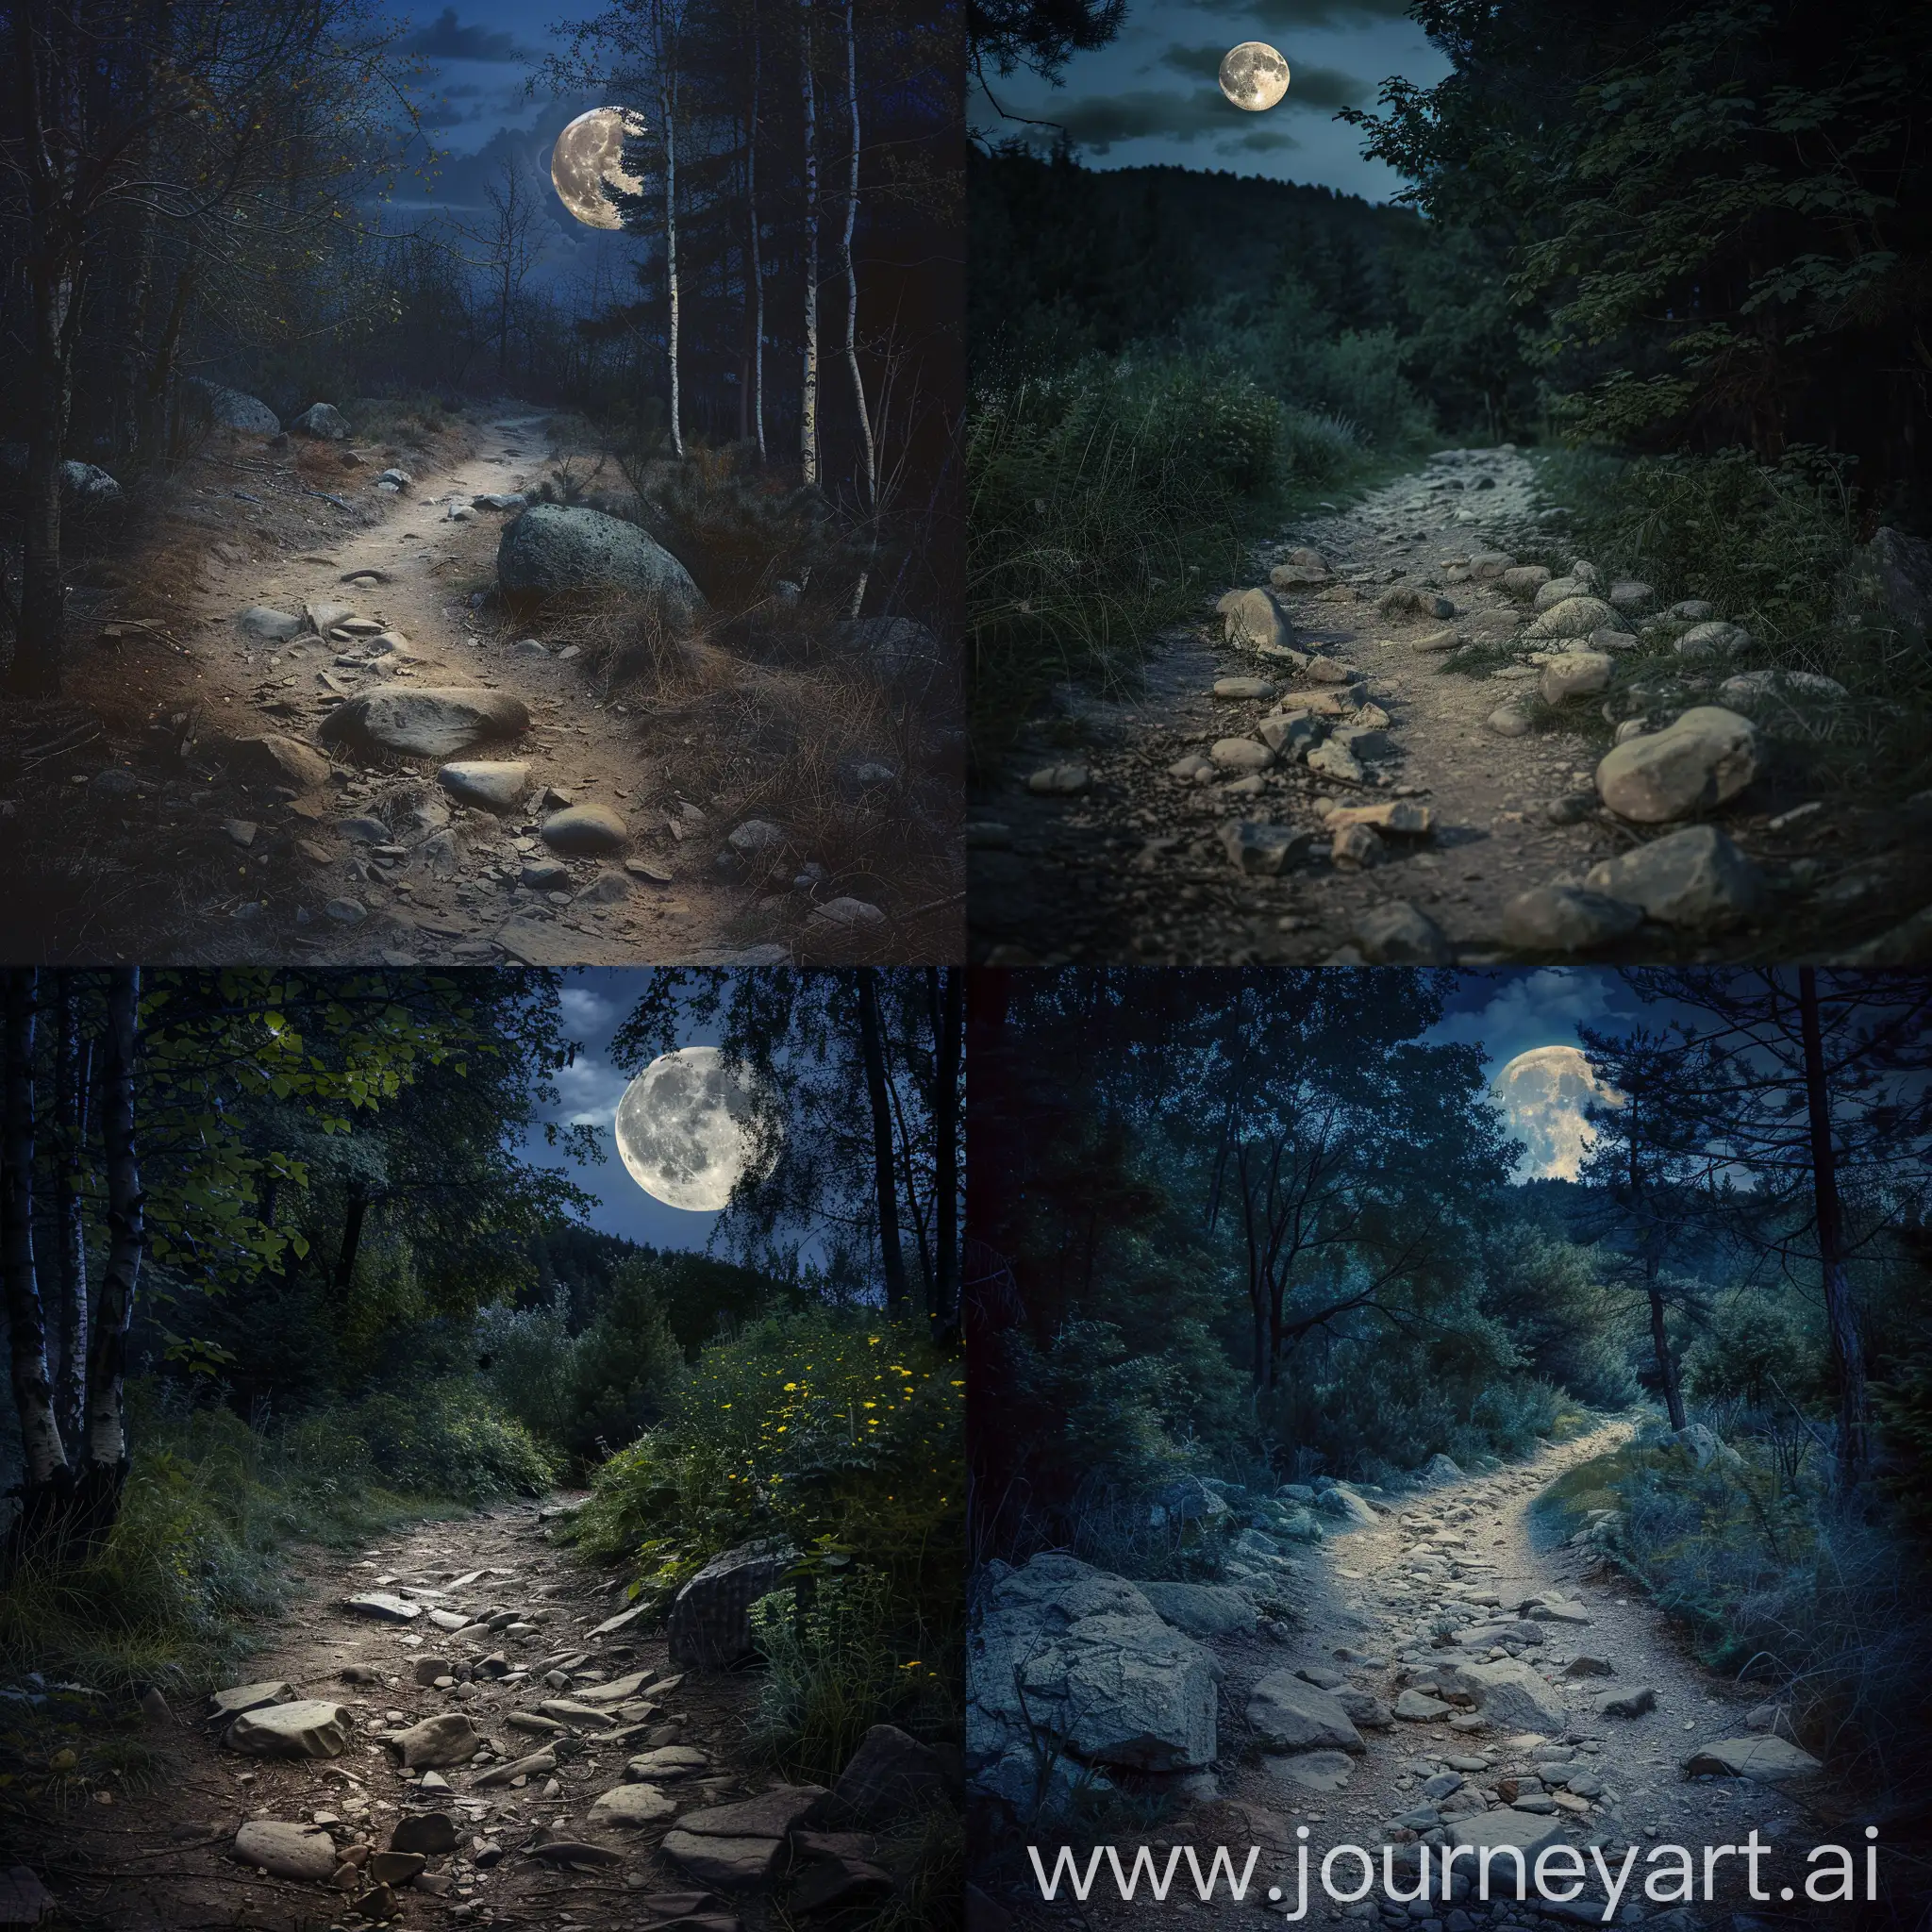 an impassable dirt path filled with stones. in a forest at night. full moon visible